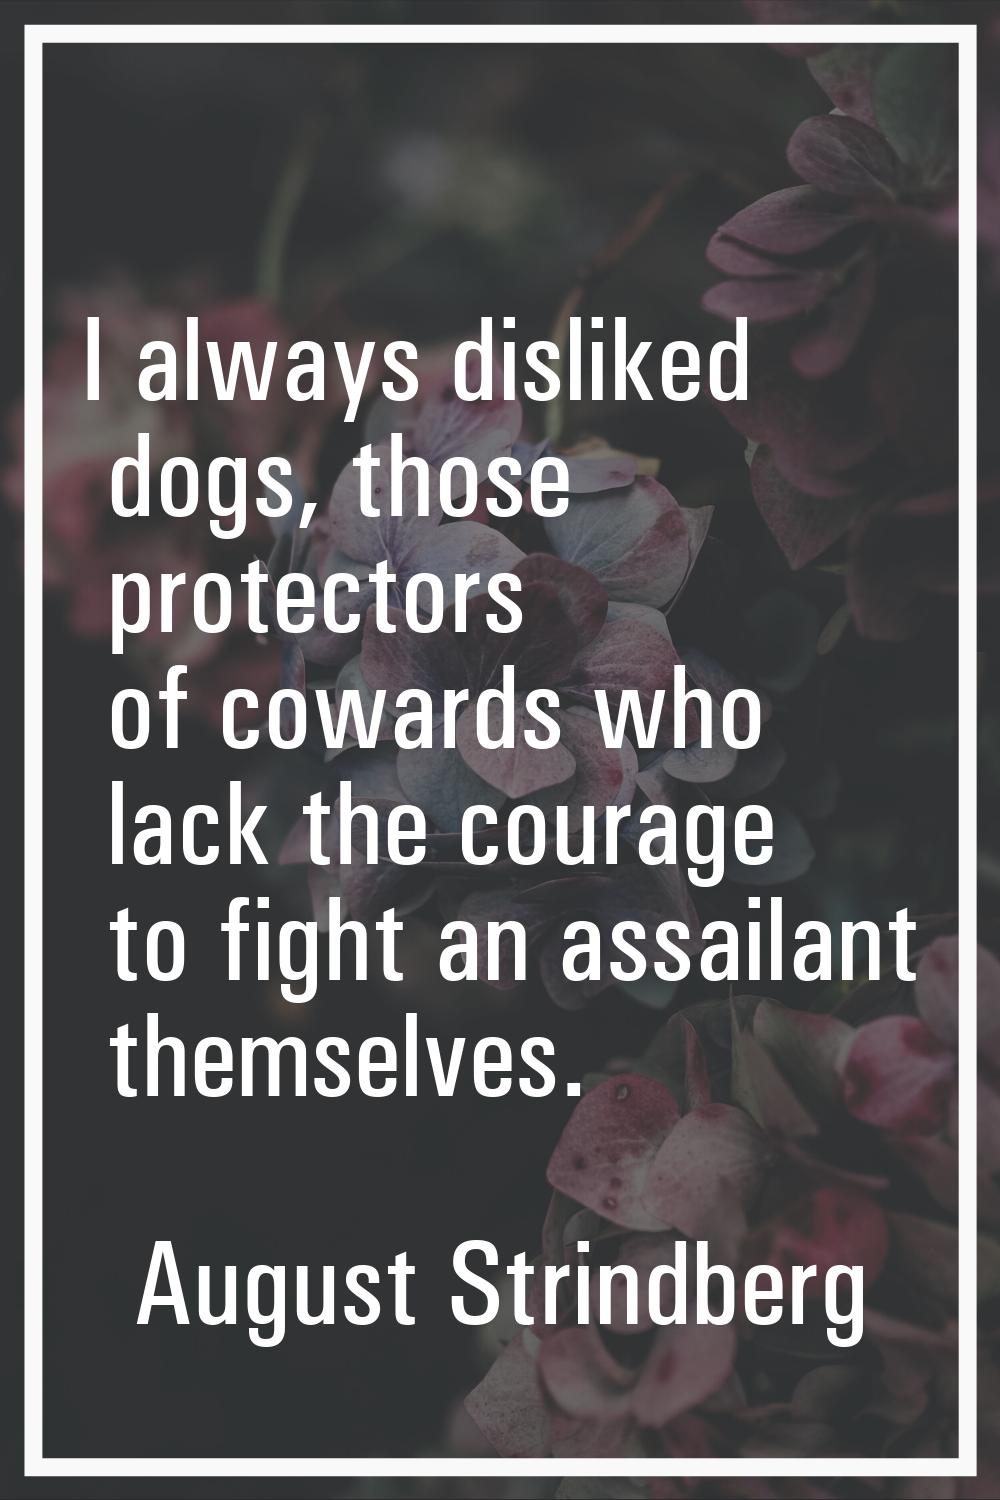 I always disliked dogs, those protectors of cowards who lack the courage to fight an assailant them